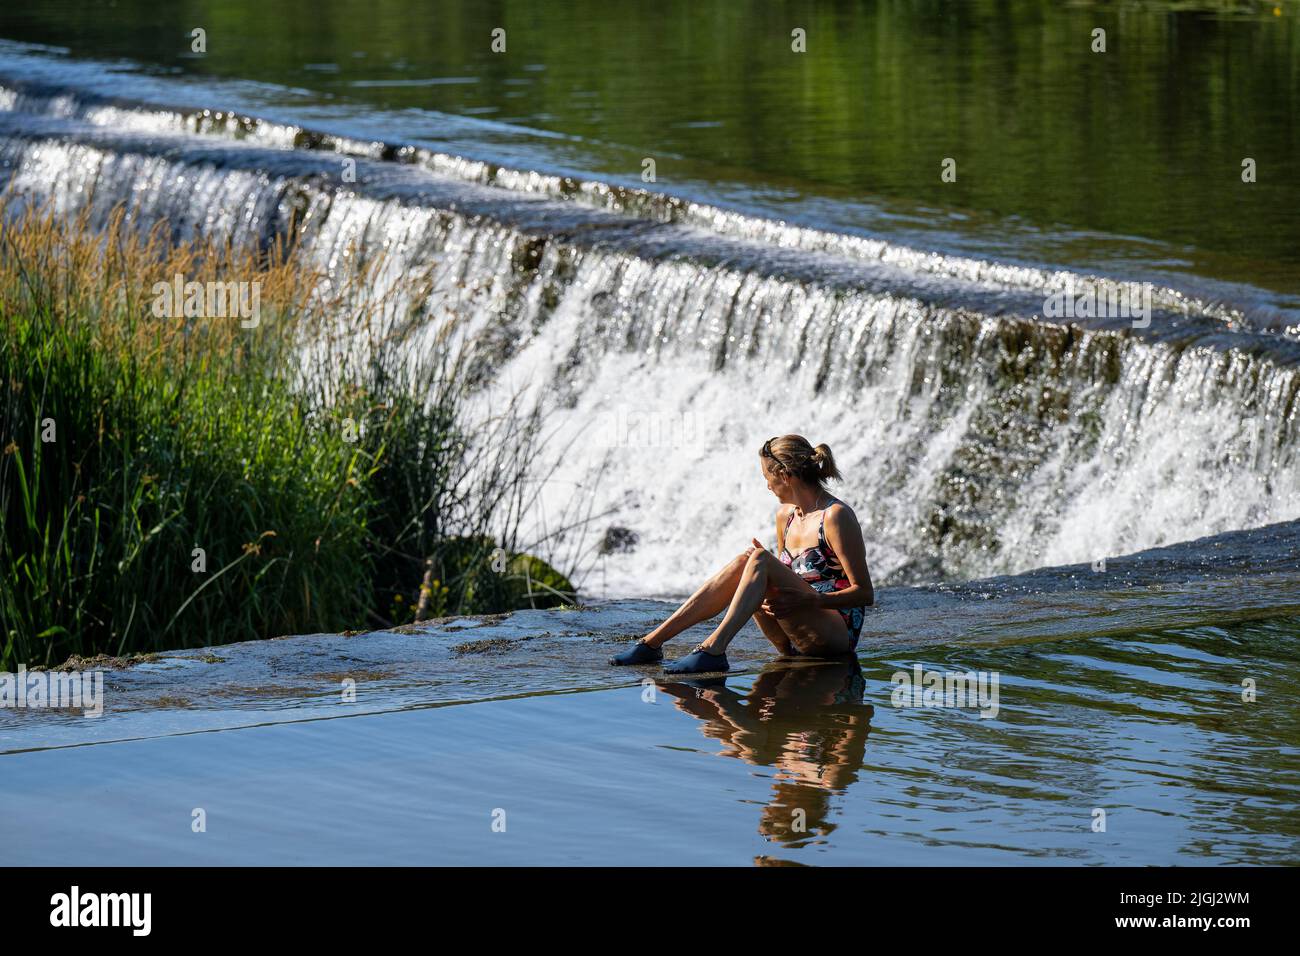 People cool off in the river Avon at Warleigh Weir near Bath in Somerset as temperatures continue to soar across the United Kingdom. Stock Photo